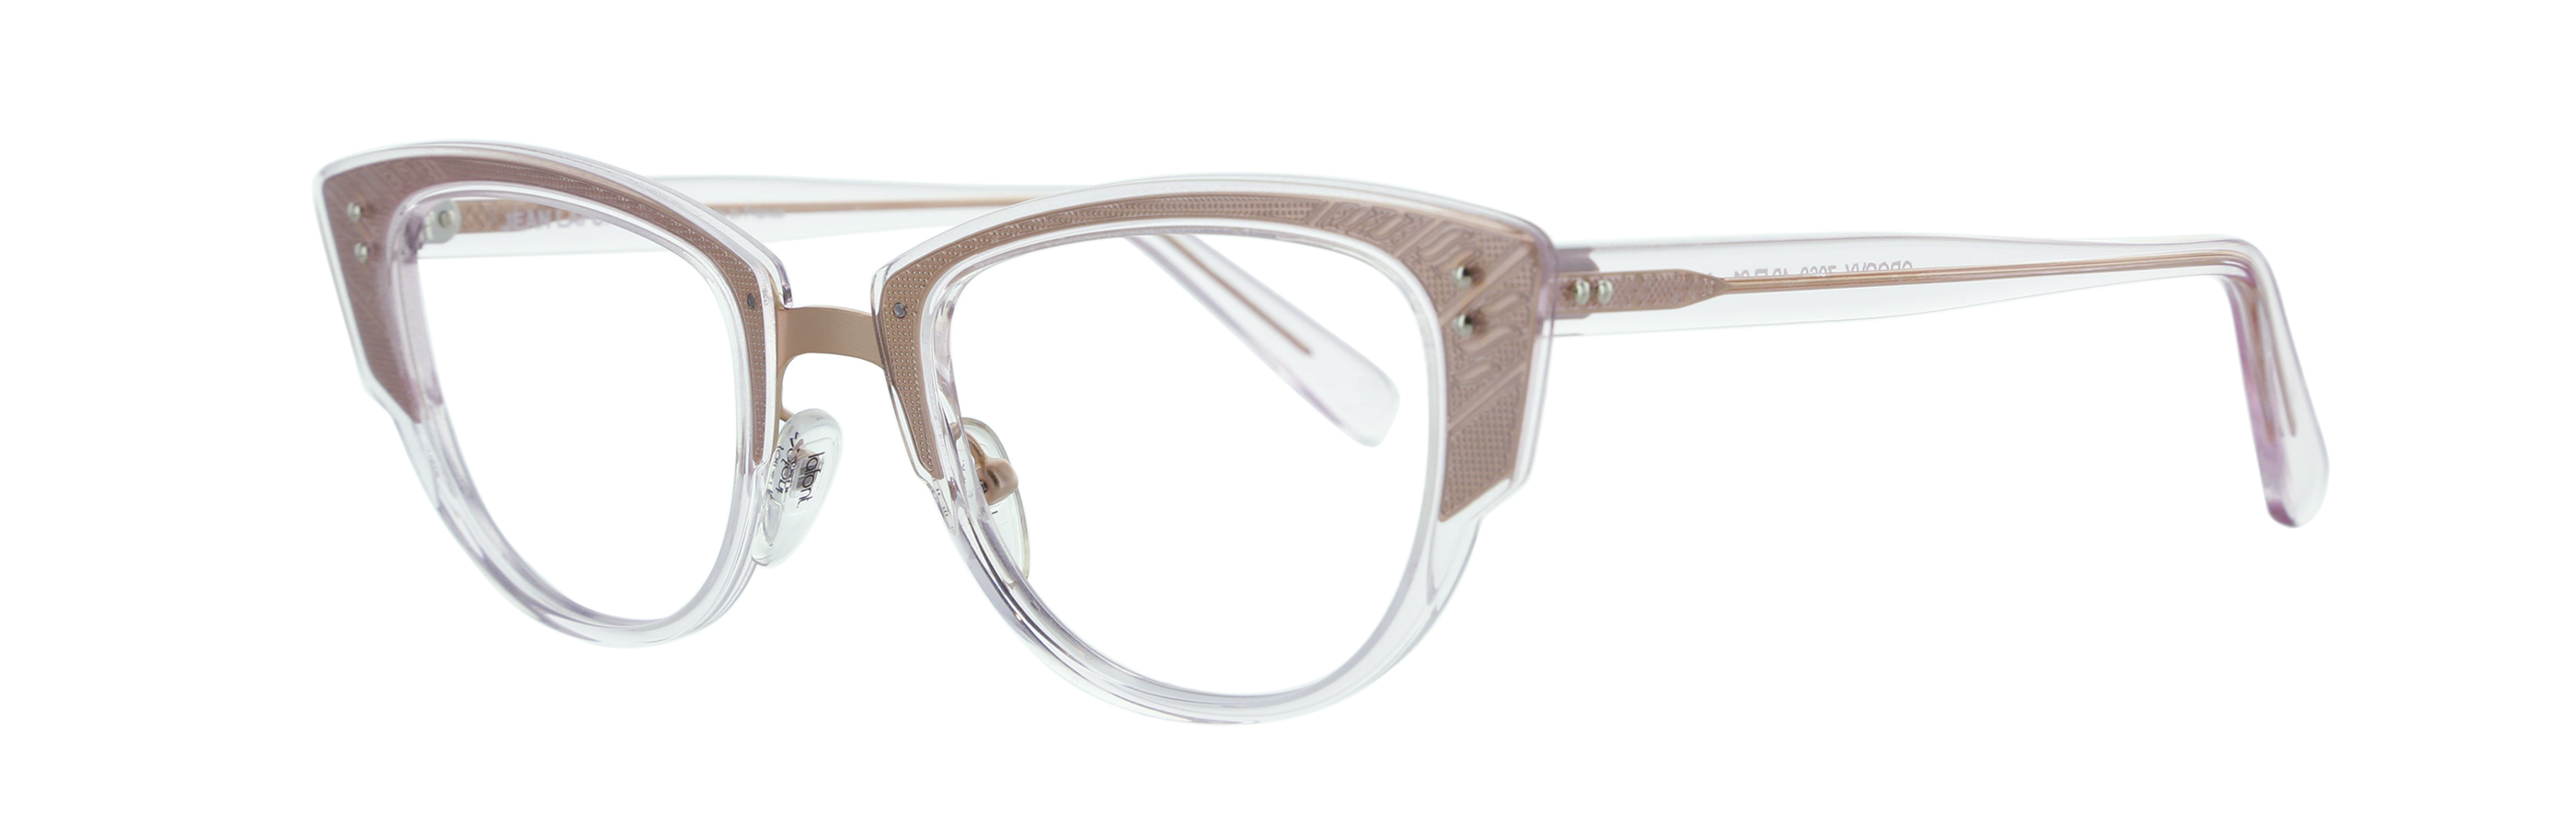 LAFONT GROOVY 7060